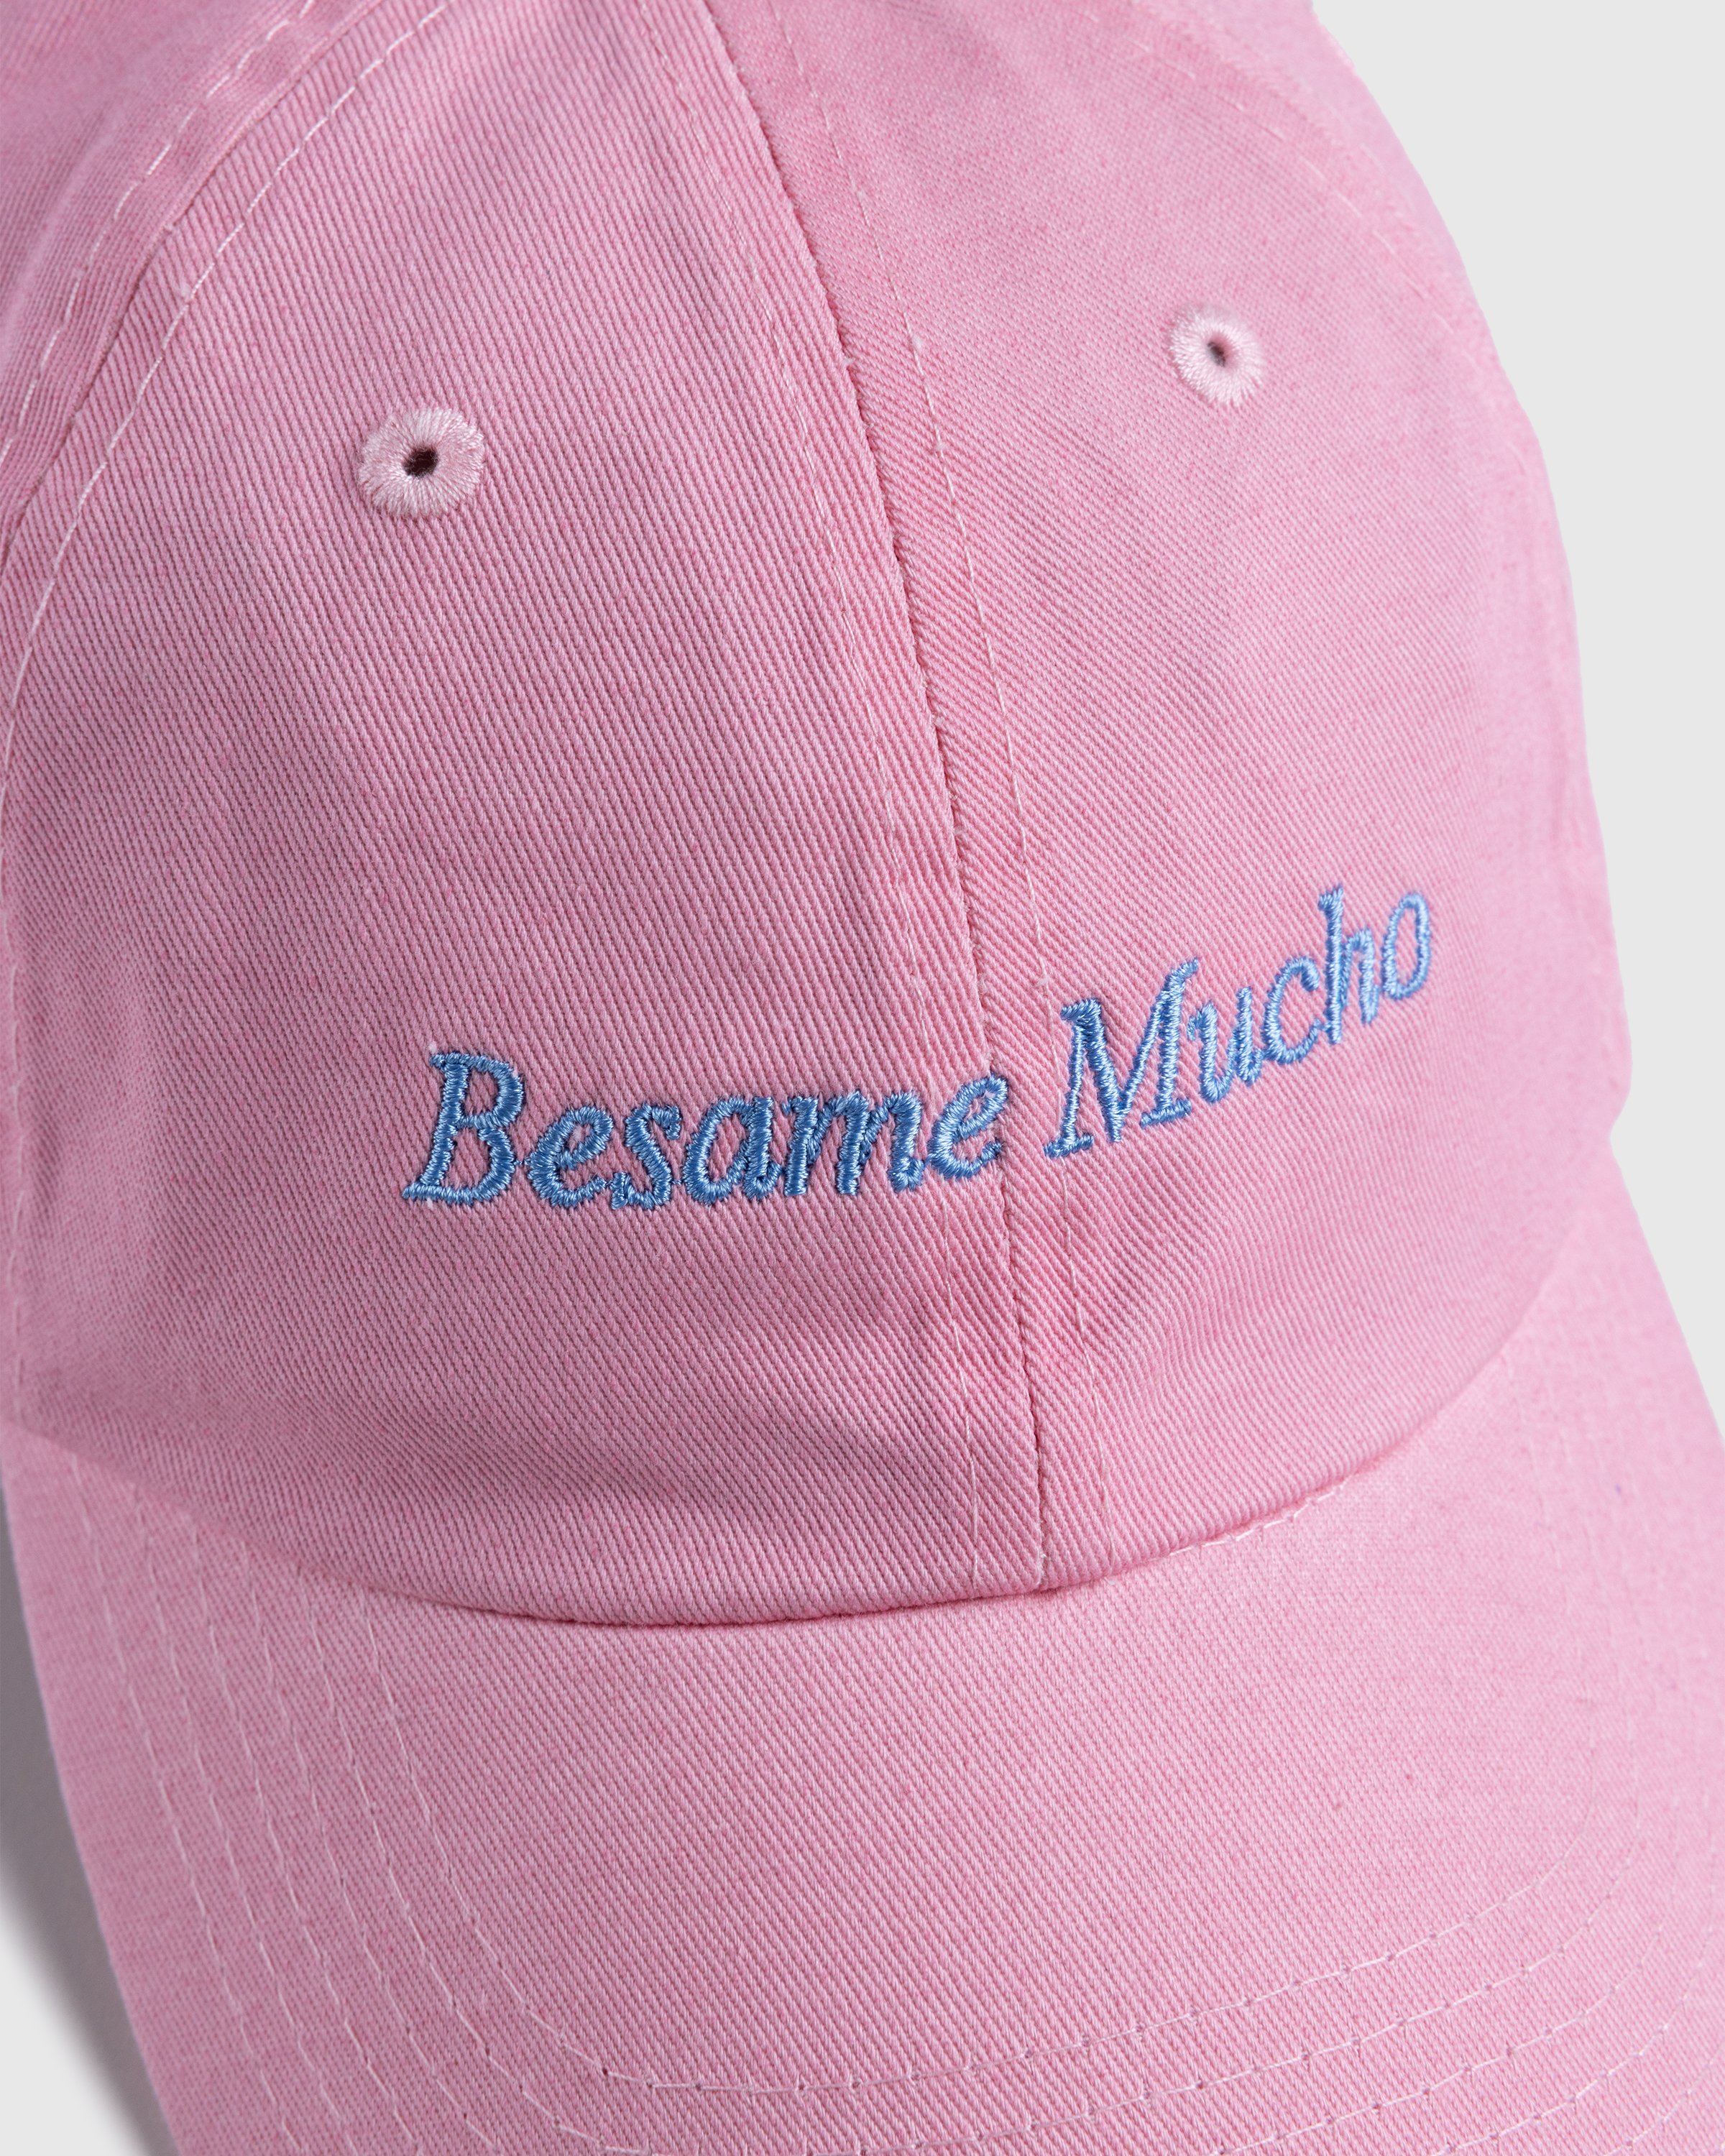 HO HO COCO - BESAME MUCHO PINK X LT BLUE - Accessories - Pink - Image 4